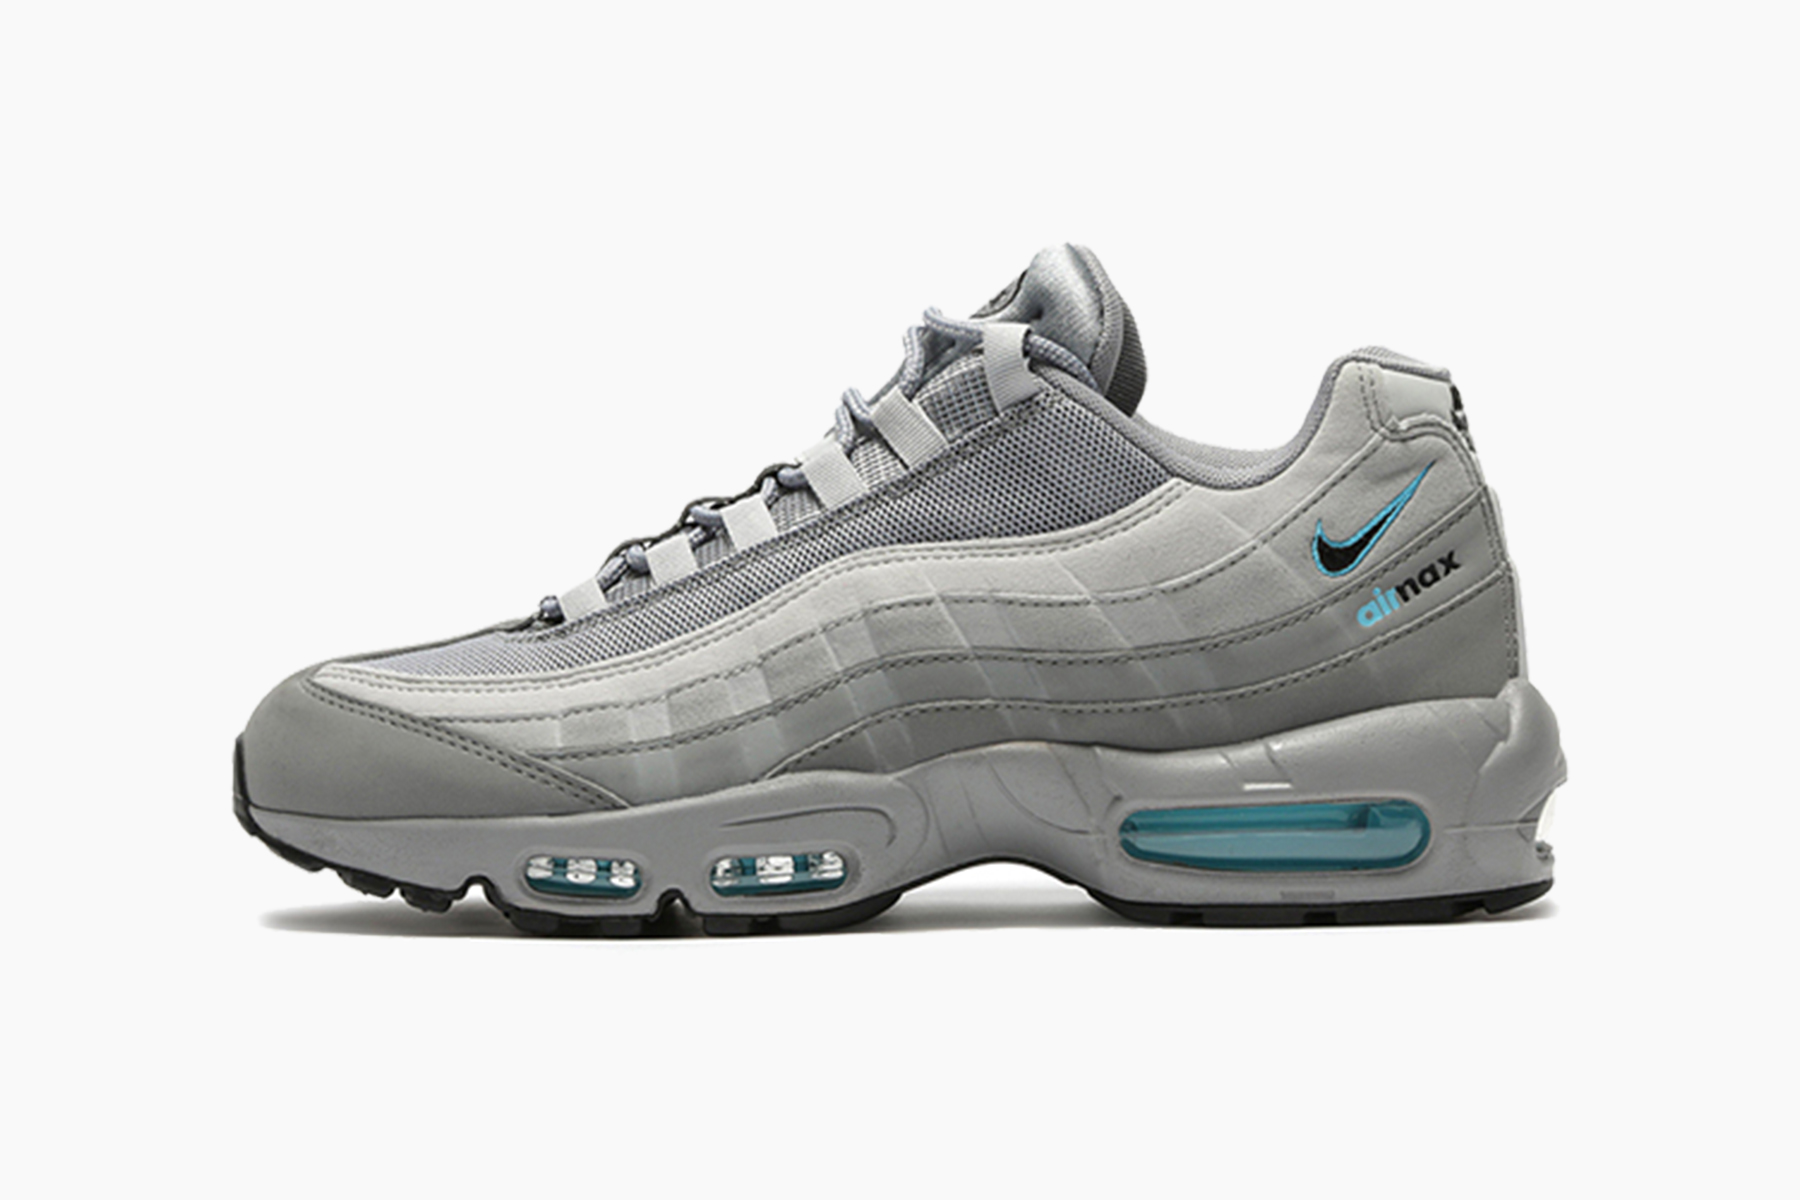 Exclusive Nike Air Max 95 in Grey/Blue 